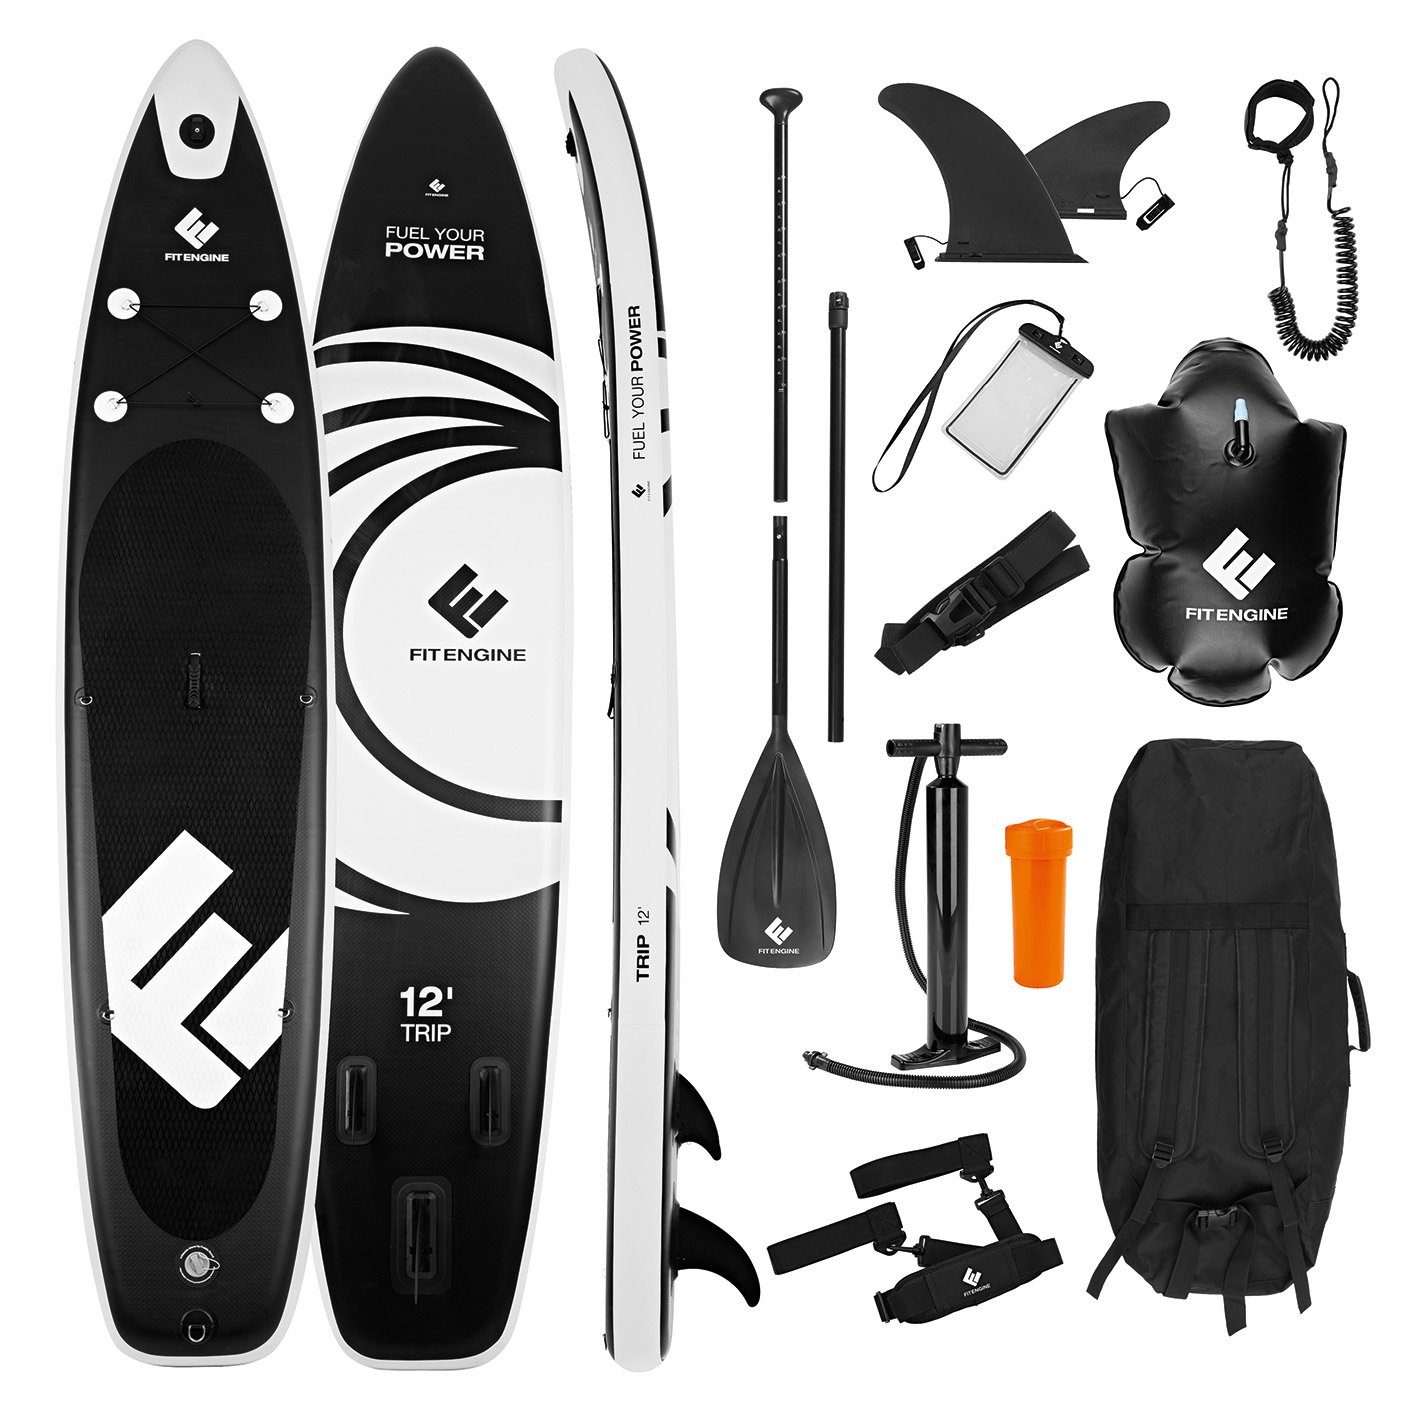 Up stabil 160kg Inflatable extra Groß 365cm Paddle, SUP-Board FitEngine Stand aufblasbar